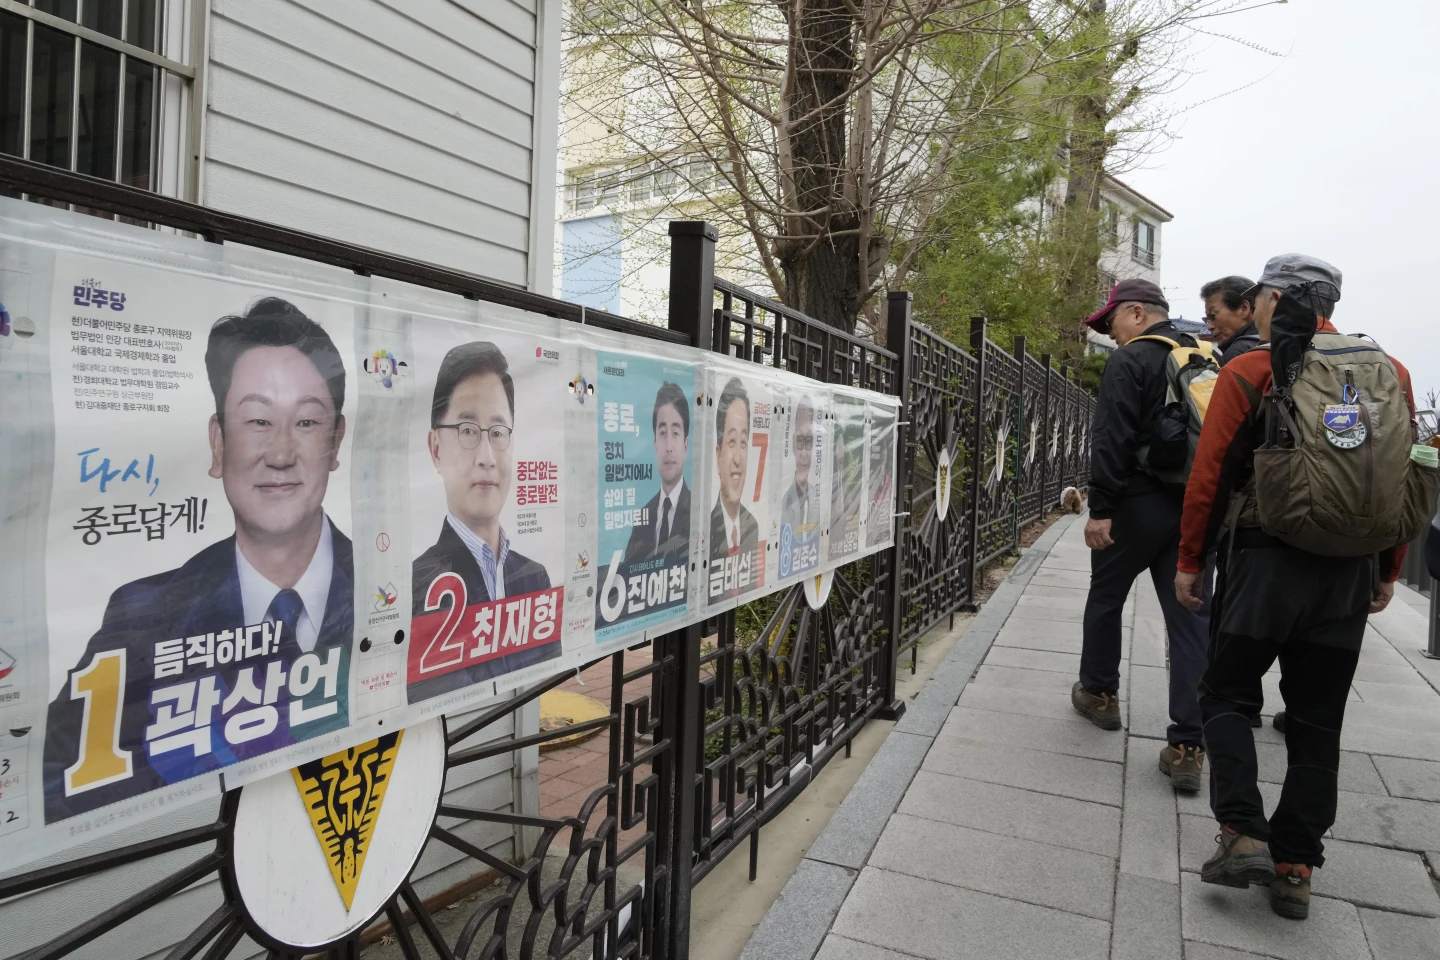 South Korea election issues